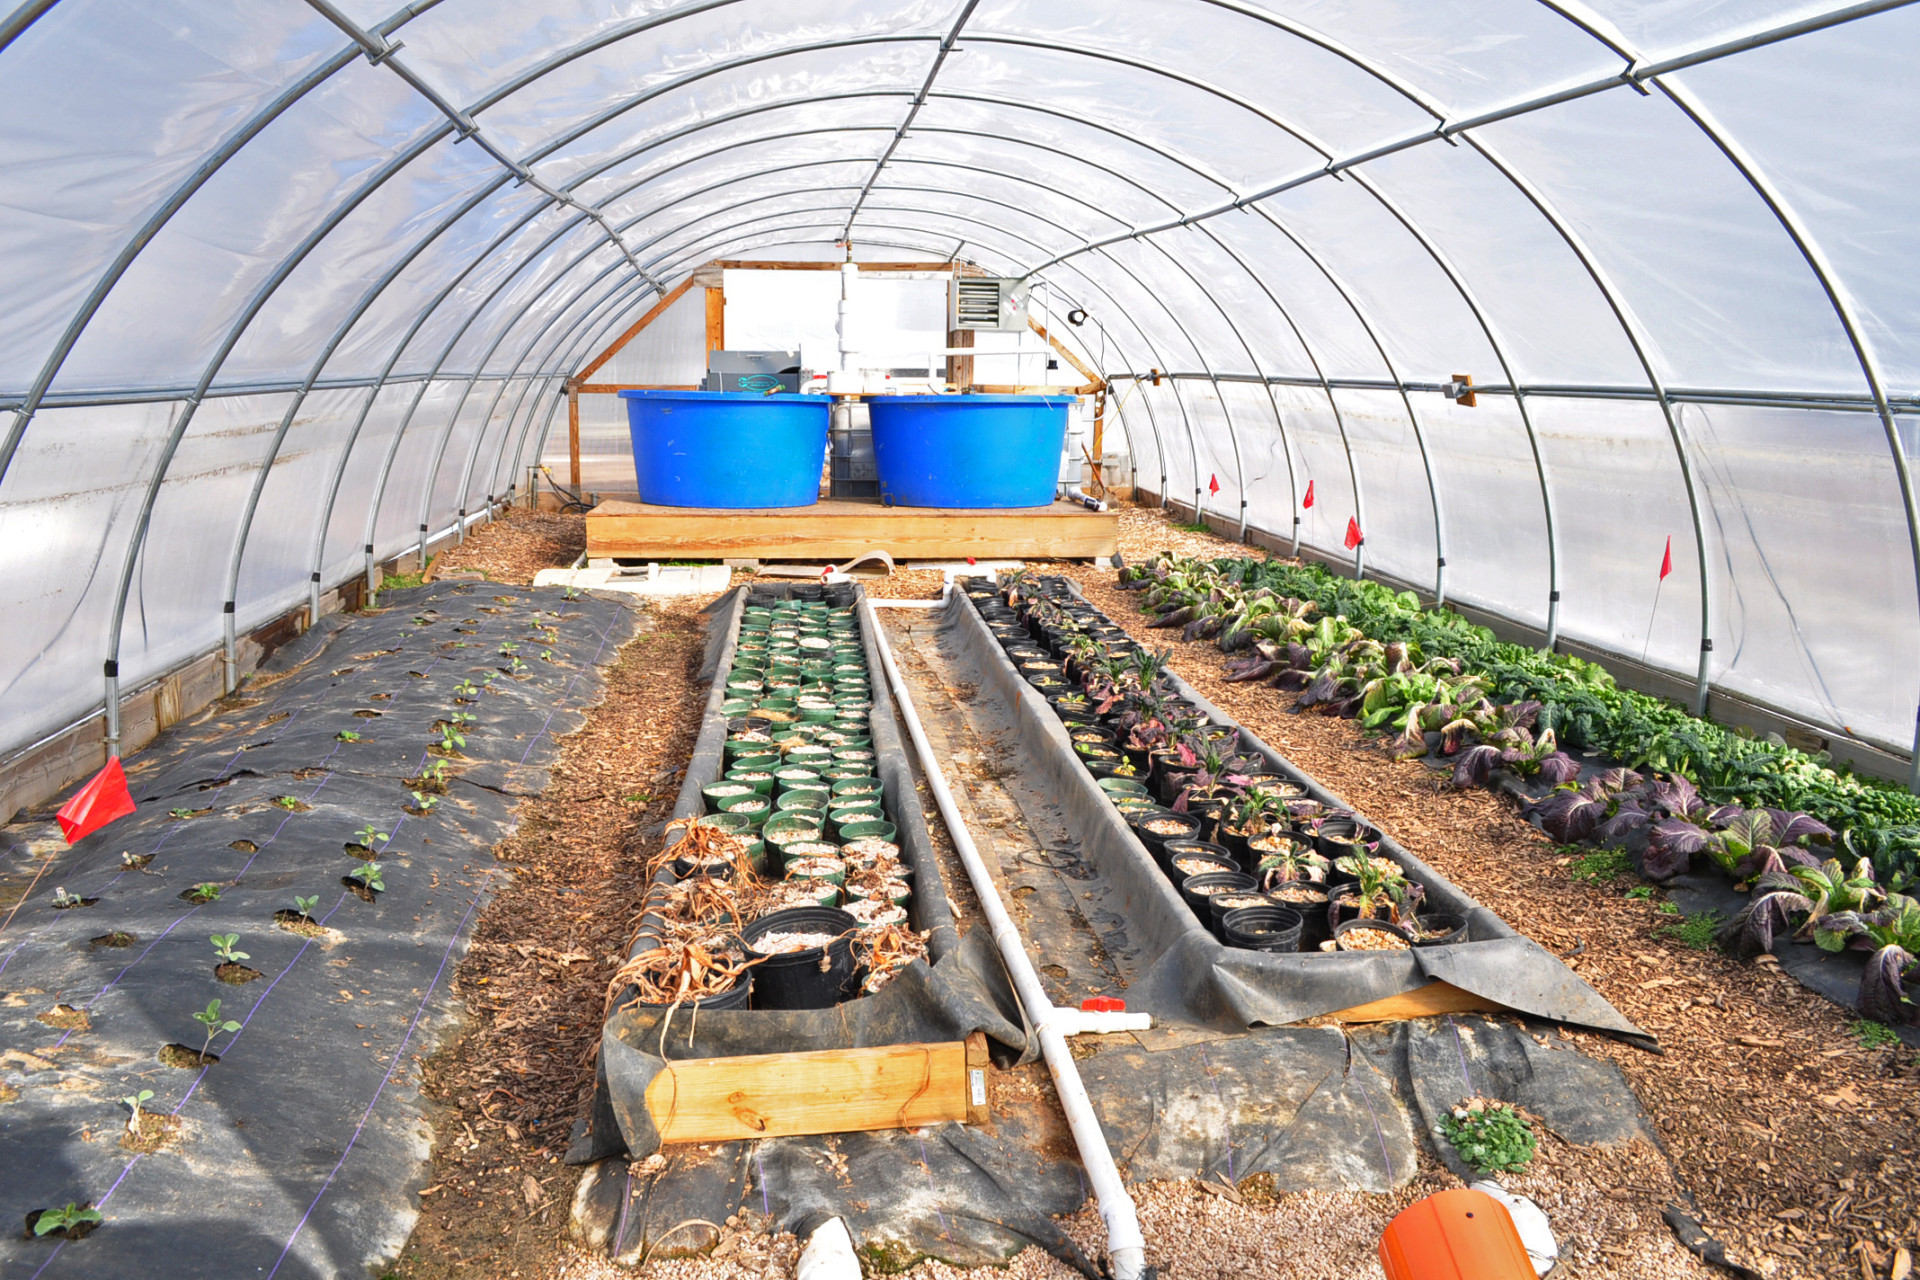 The remnants of several projects wait for spring in a hoop house at the farm this past winter. The blue pools at the end have grown fish in the past and beds are being transitioned from fall plants to spring.